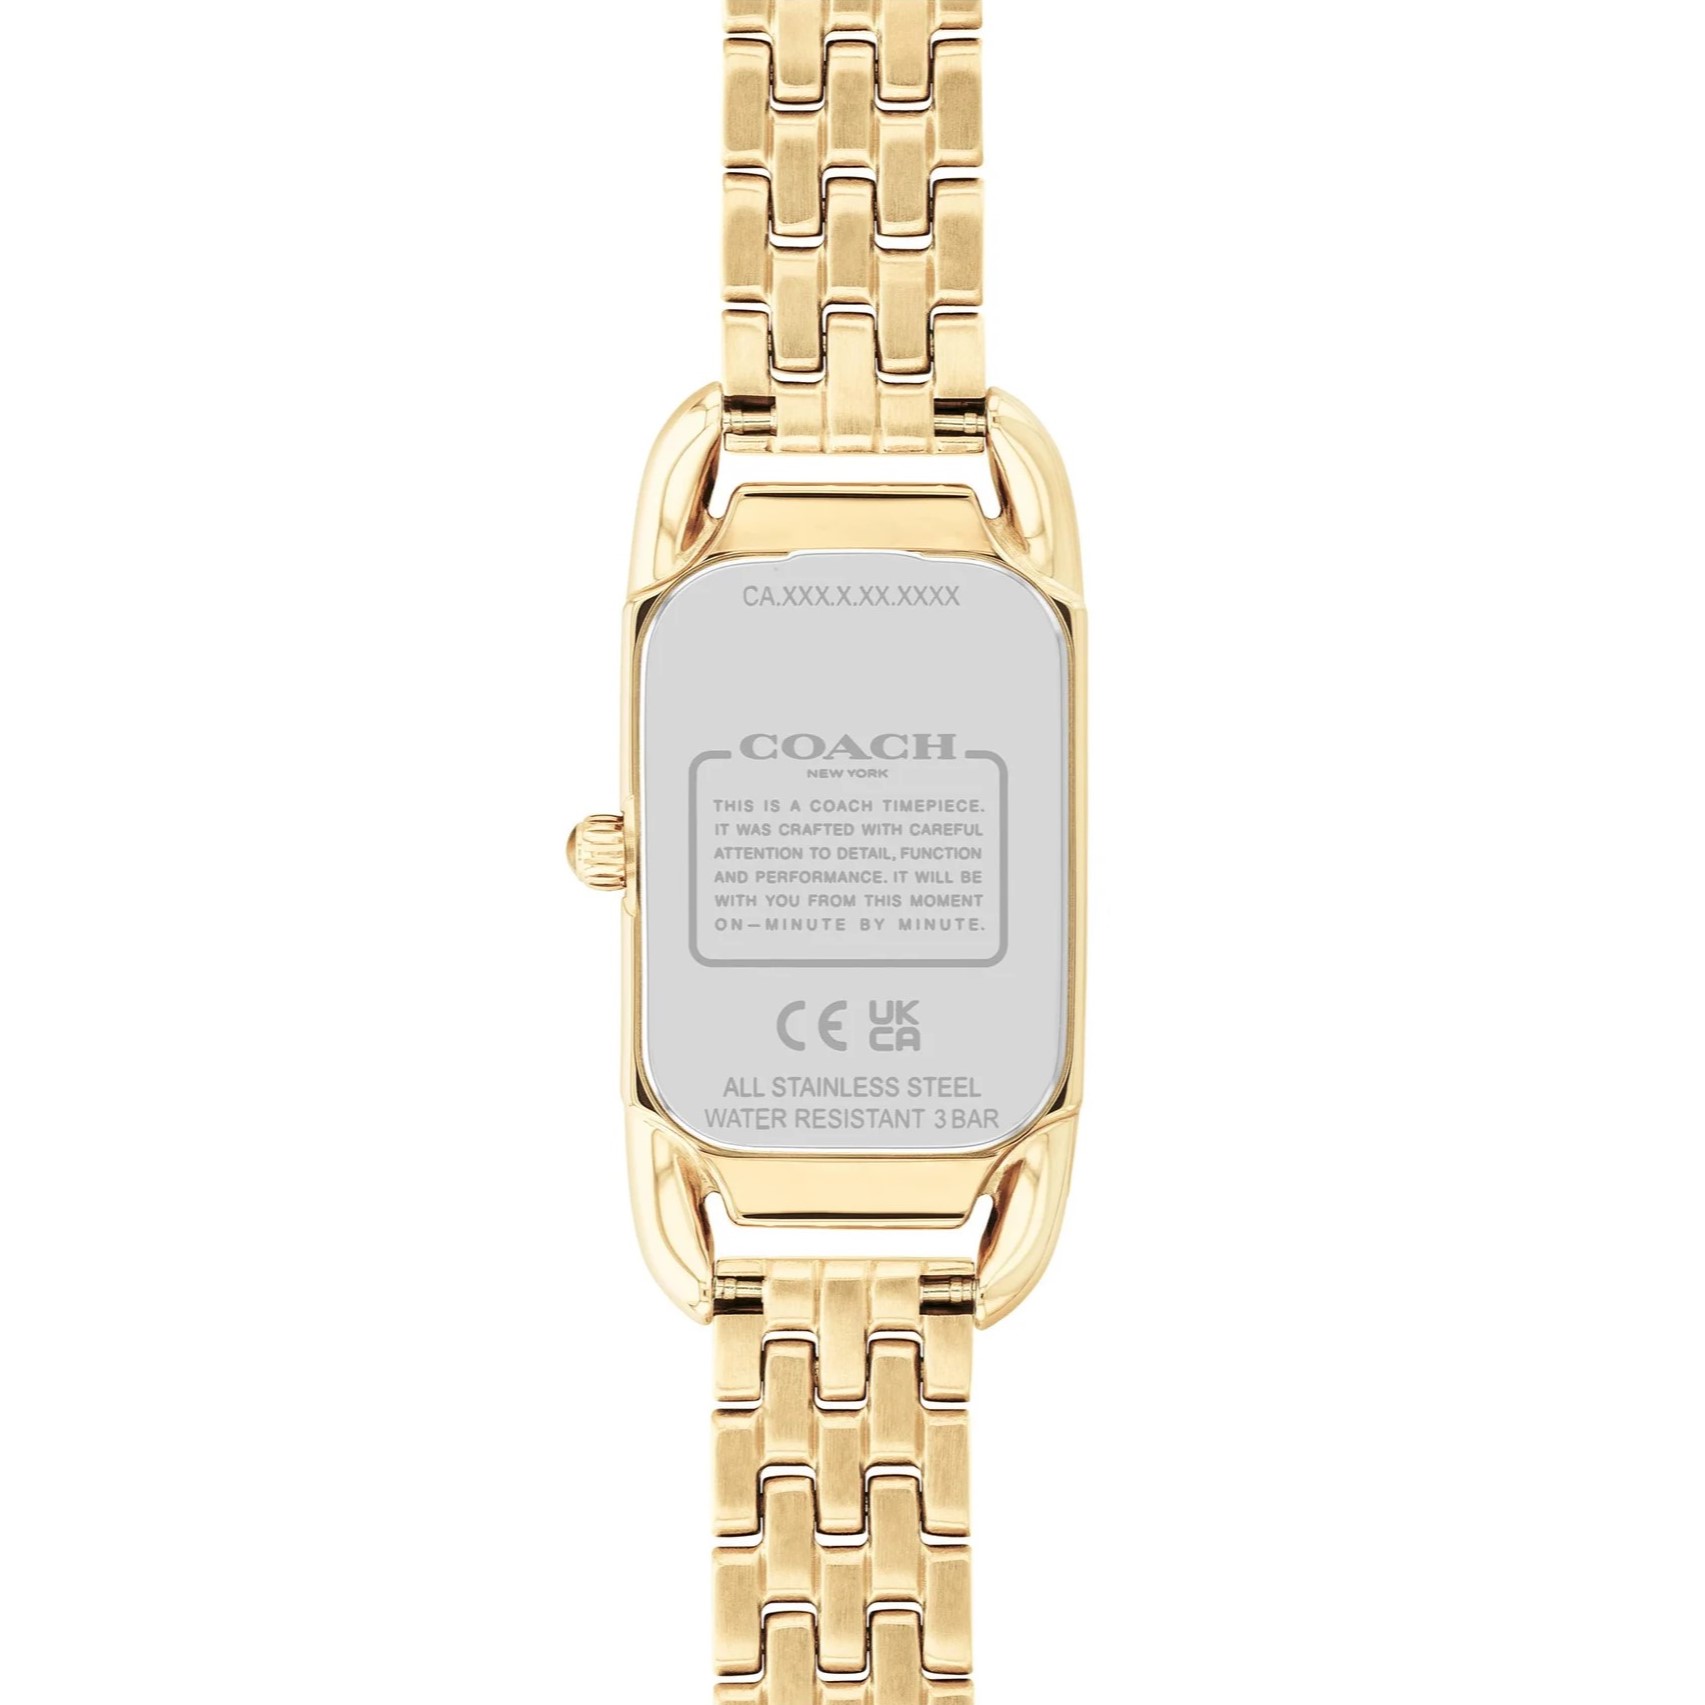 ĐỒNG HỒ ĐEO TAY NỮ COACH CADIE GOLD STAINLESS STEEL WHITE DIAL WOMENS WATCH 14504036 1